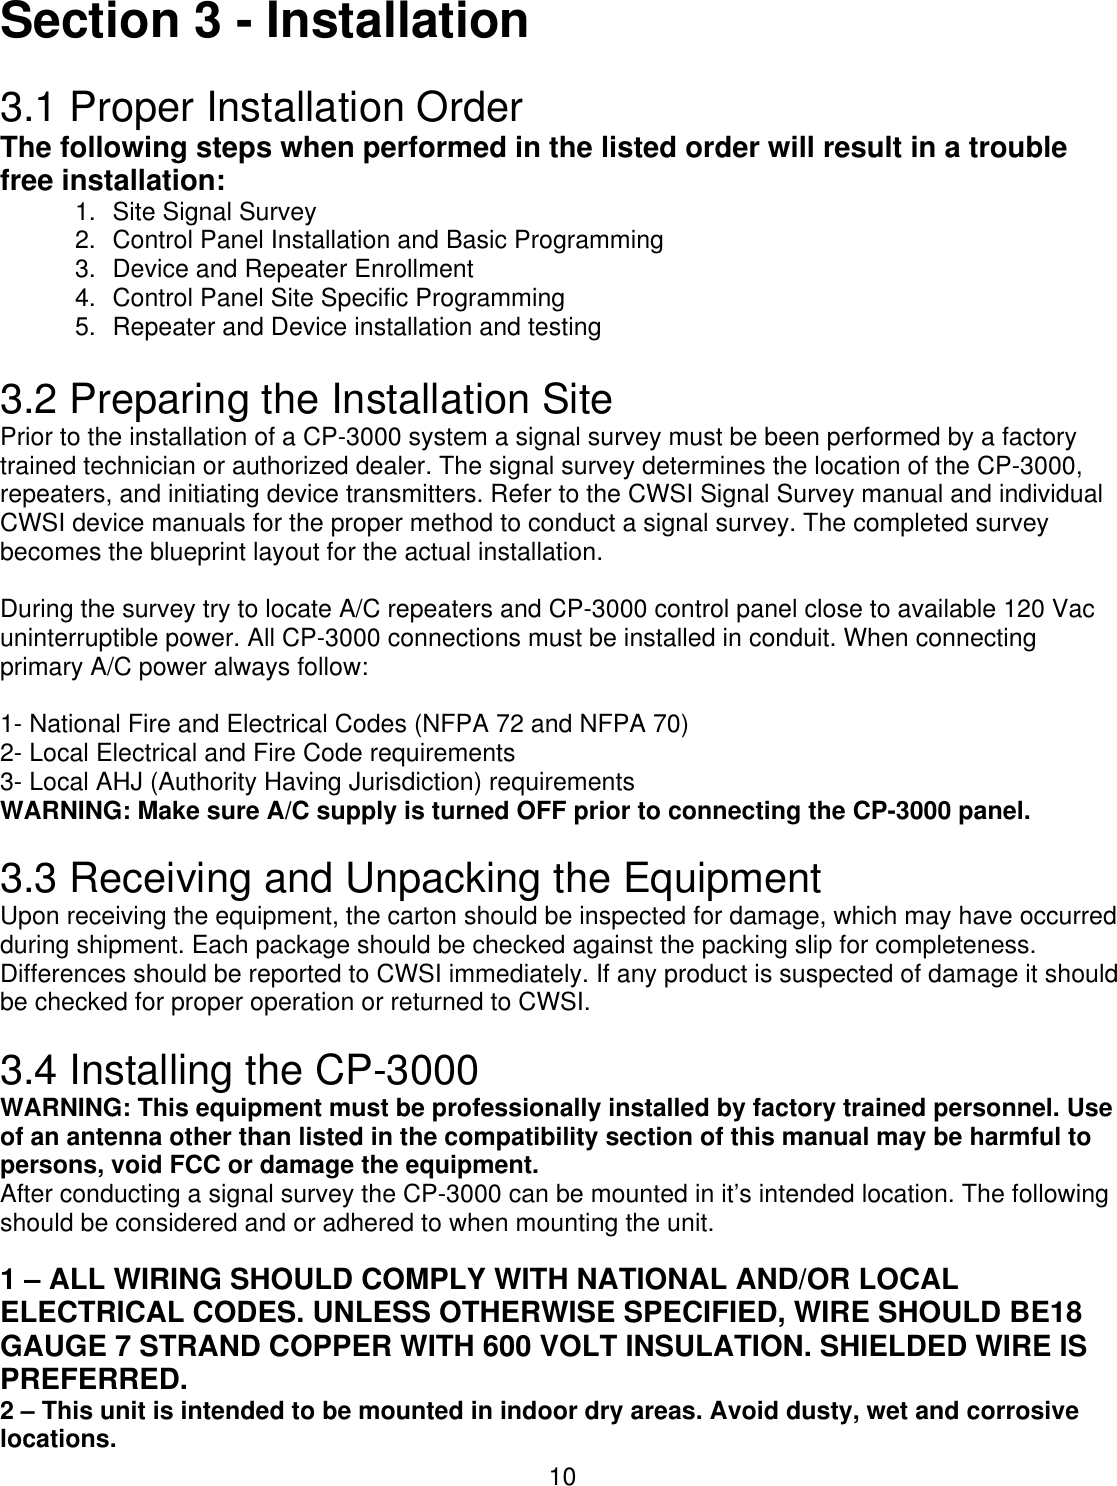  10Section 3 - Installation  3.1 Proper Installation Order The following steps when performed in the listed order will result in a trouble free installation: 1. Site Signal Survey 2.  Control Panel Installation and Basic Programming 3. Device and Repeater Enrollment  4. Control Panel Site Specific Programming 5.  Repeater and Device installation and testing  3.2 Preparing the Installation Site Prior to the installation of a CP-3000 system a signal survey must be been performed by a factory trained technician or authorized dealer. The signal survey determines the location of the CP-3000, repeaters, and initiating device transmitters. Refer to the CWSI Signal Survey manual and individual CWSI device manuals for the proper method to conduct a signal survey. The completed survey becomes the blueprint layout for the actual installation.   During the survey try to locate A/C repeaters and CP-3000 control panel close to available 120 Vac uninterruptible power. All CP-3000 connections must be installed in conduit. When connecting primary A/C power always follow:  1- National Fire and Electrical Codes (NFPA 72 and NFPA 70) 2- Local Electrical and Fire Code requirements 3- Local AHJ (Authority Having Jurisdiction) requirements WARNING: Make sure A/C supply is turned OFF prior to connecting the CP-3000 panel.  3.3 Receiving and Unpacking the Equipment Upon receiving the equipment, the carton should be inspected for damage, which may have occurred during shipment. Each package should be checked against the packing slip for completeness. Differences should be reported to CWSI immediately. If any product is suspected of damage it should be checked for proper operation or returned to CWSI.   3.4 Installing the CP-3000 WARNING: This equipment must be professionally installed by factory trained personnel. Use of an antenna other than listed in the compatibility section of this manual may be harmful to persons, void FCC or damage the equipment. After conducting a signal survey the CP-3000 can be mounted in it’s intended location. The following should be considered and or adhered to when mounting the unit. 1 – ALL WIRING SHOULD COMPLY WITH NATIONAL AND/OR LOCAL ELECTRICAL CODES. UNLESS OTHERWISE SPECIFIED, WIRE SHOULD BE18 GAUGE 7 STRAND COPPER WITH 600 VOLT INSULATION. SHIELDED WIRE IS PREFERRED.  2 – This unit is intended to be mounted in indoor dry areas. Avoid dusty, wet and corrosive locations. 